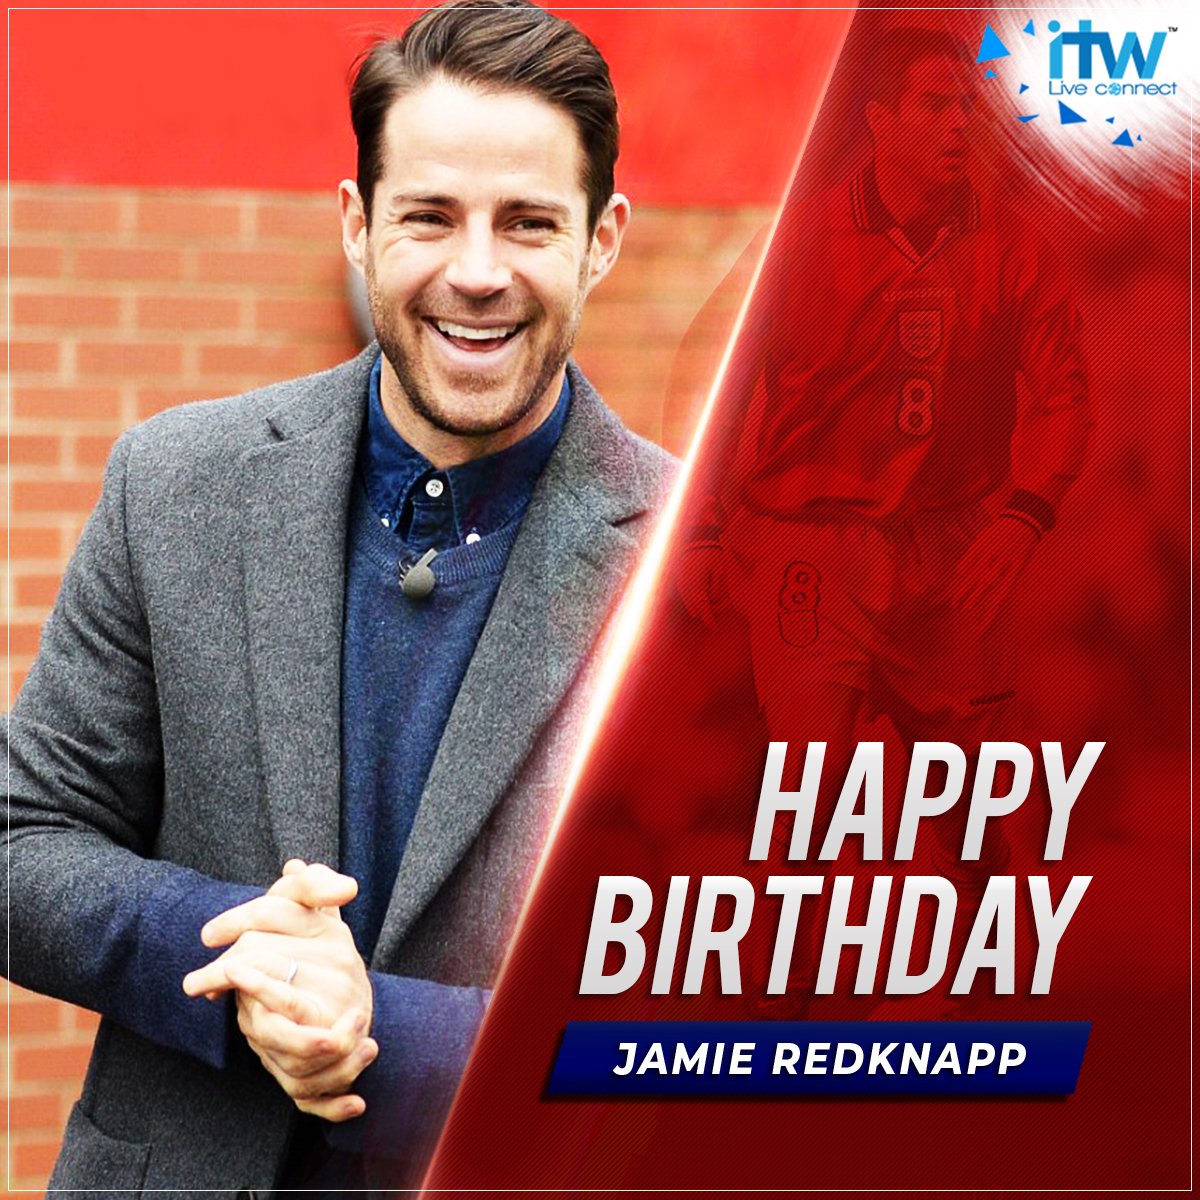 Wishing former and midfielder Jamie Redknapp a very Happy Birthday as he turns 44 today. 